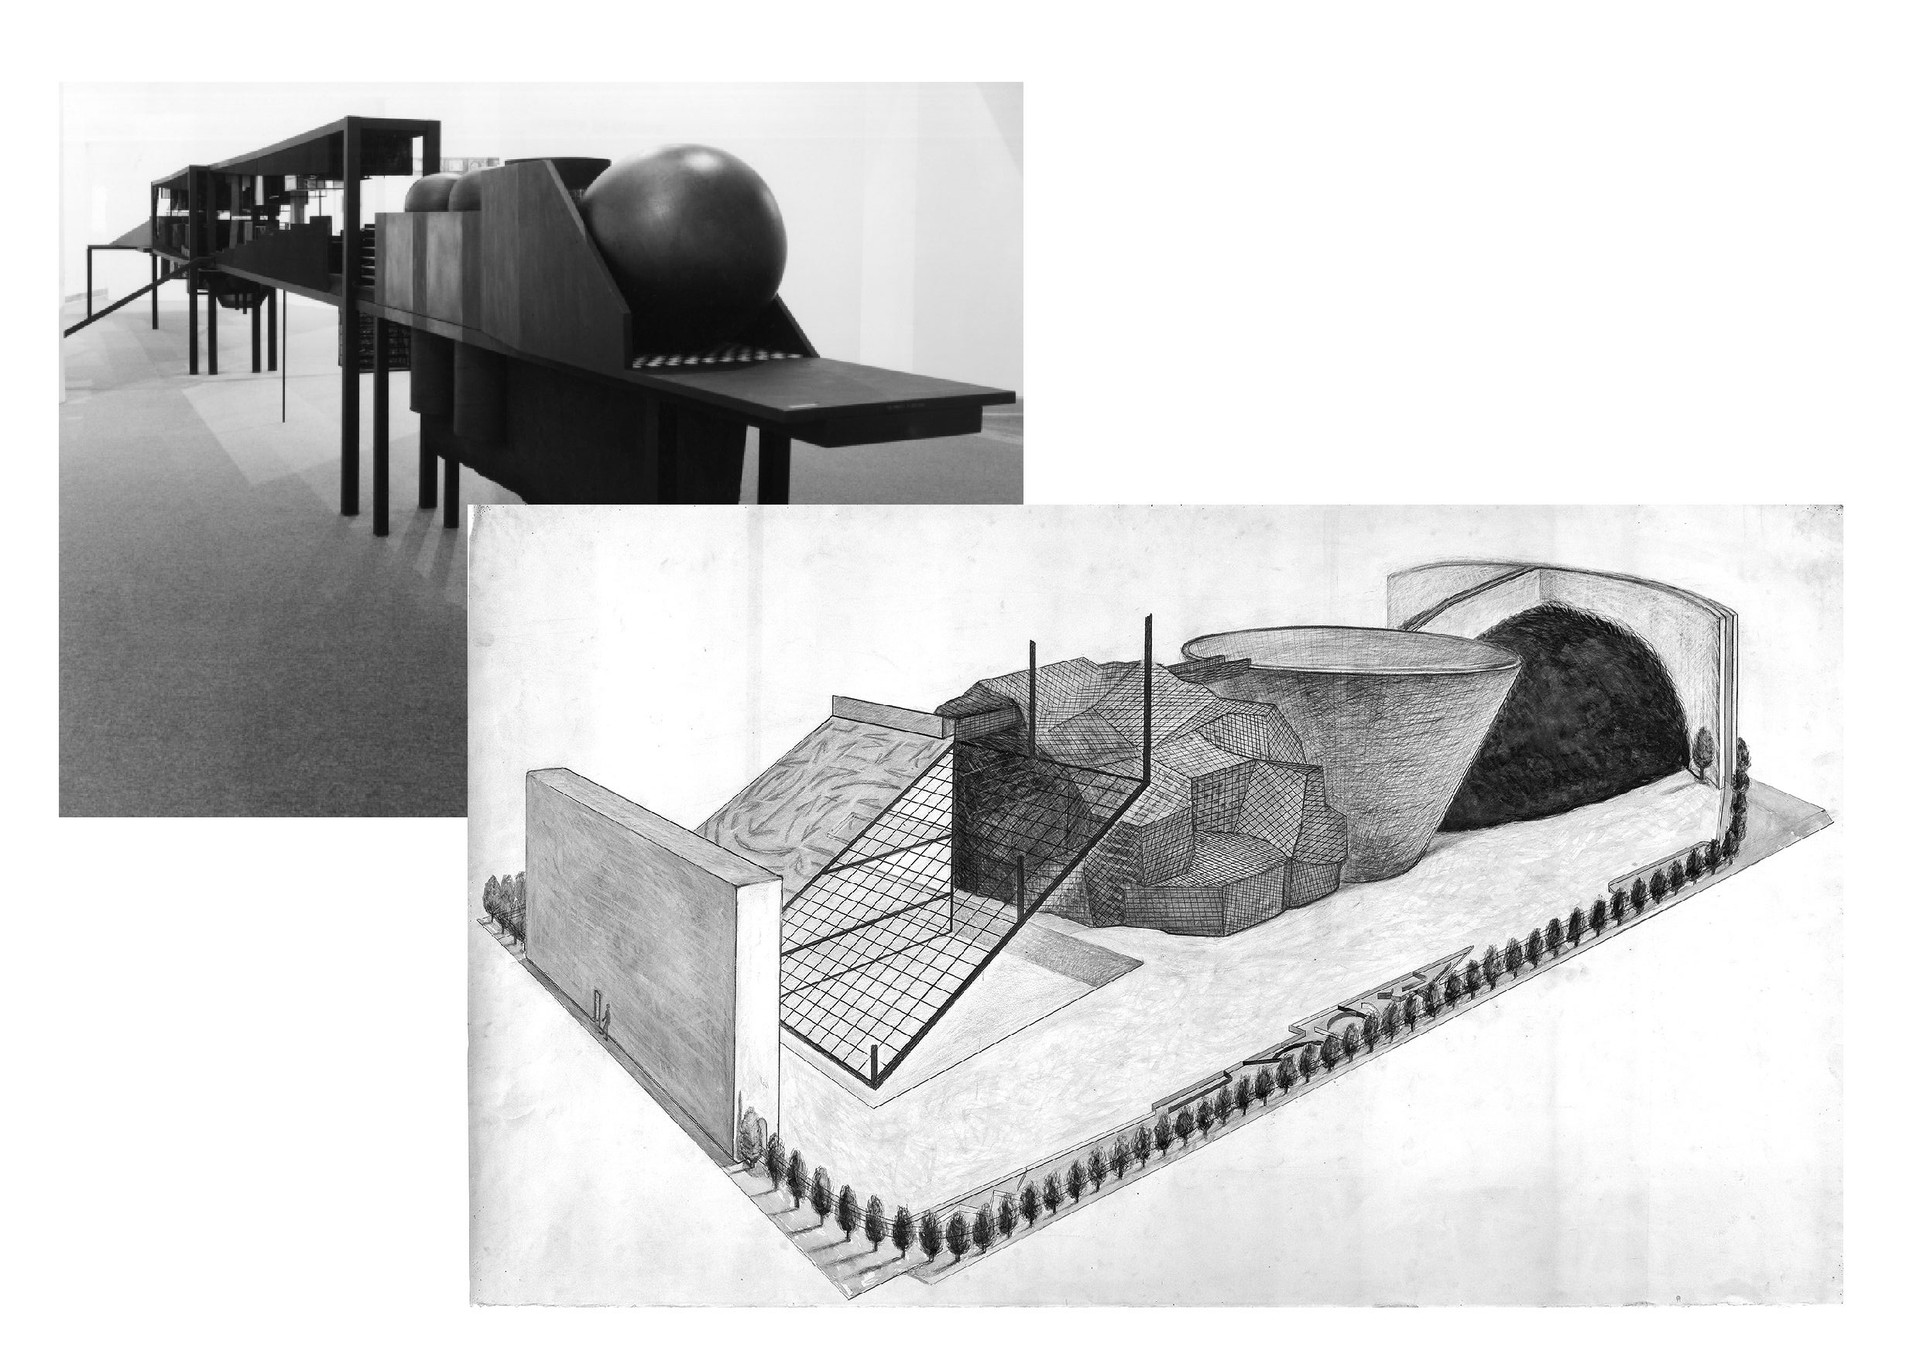 «The Process in Question/Bridge of Reversible Destiny» (1973-89) + «Container for Mind-Blank-Body» (1984). Courtesy: https://tinyurl.com/239b92b3